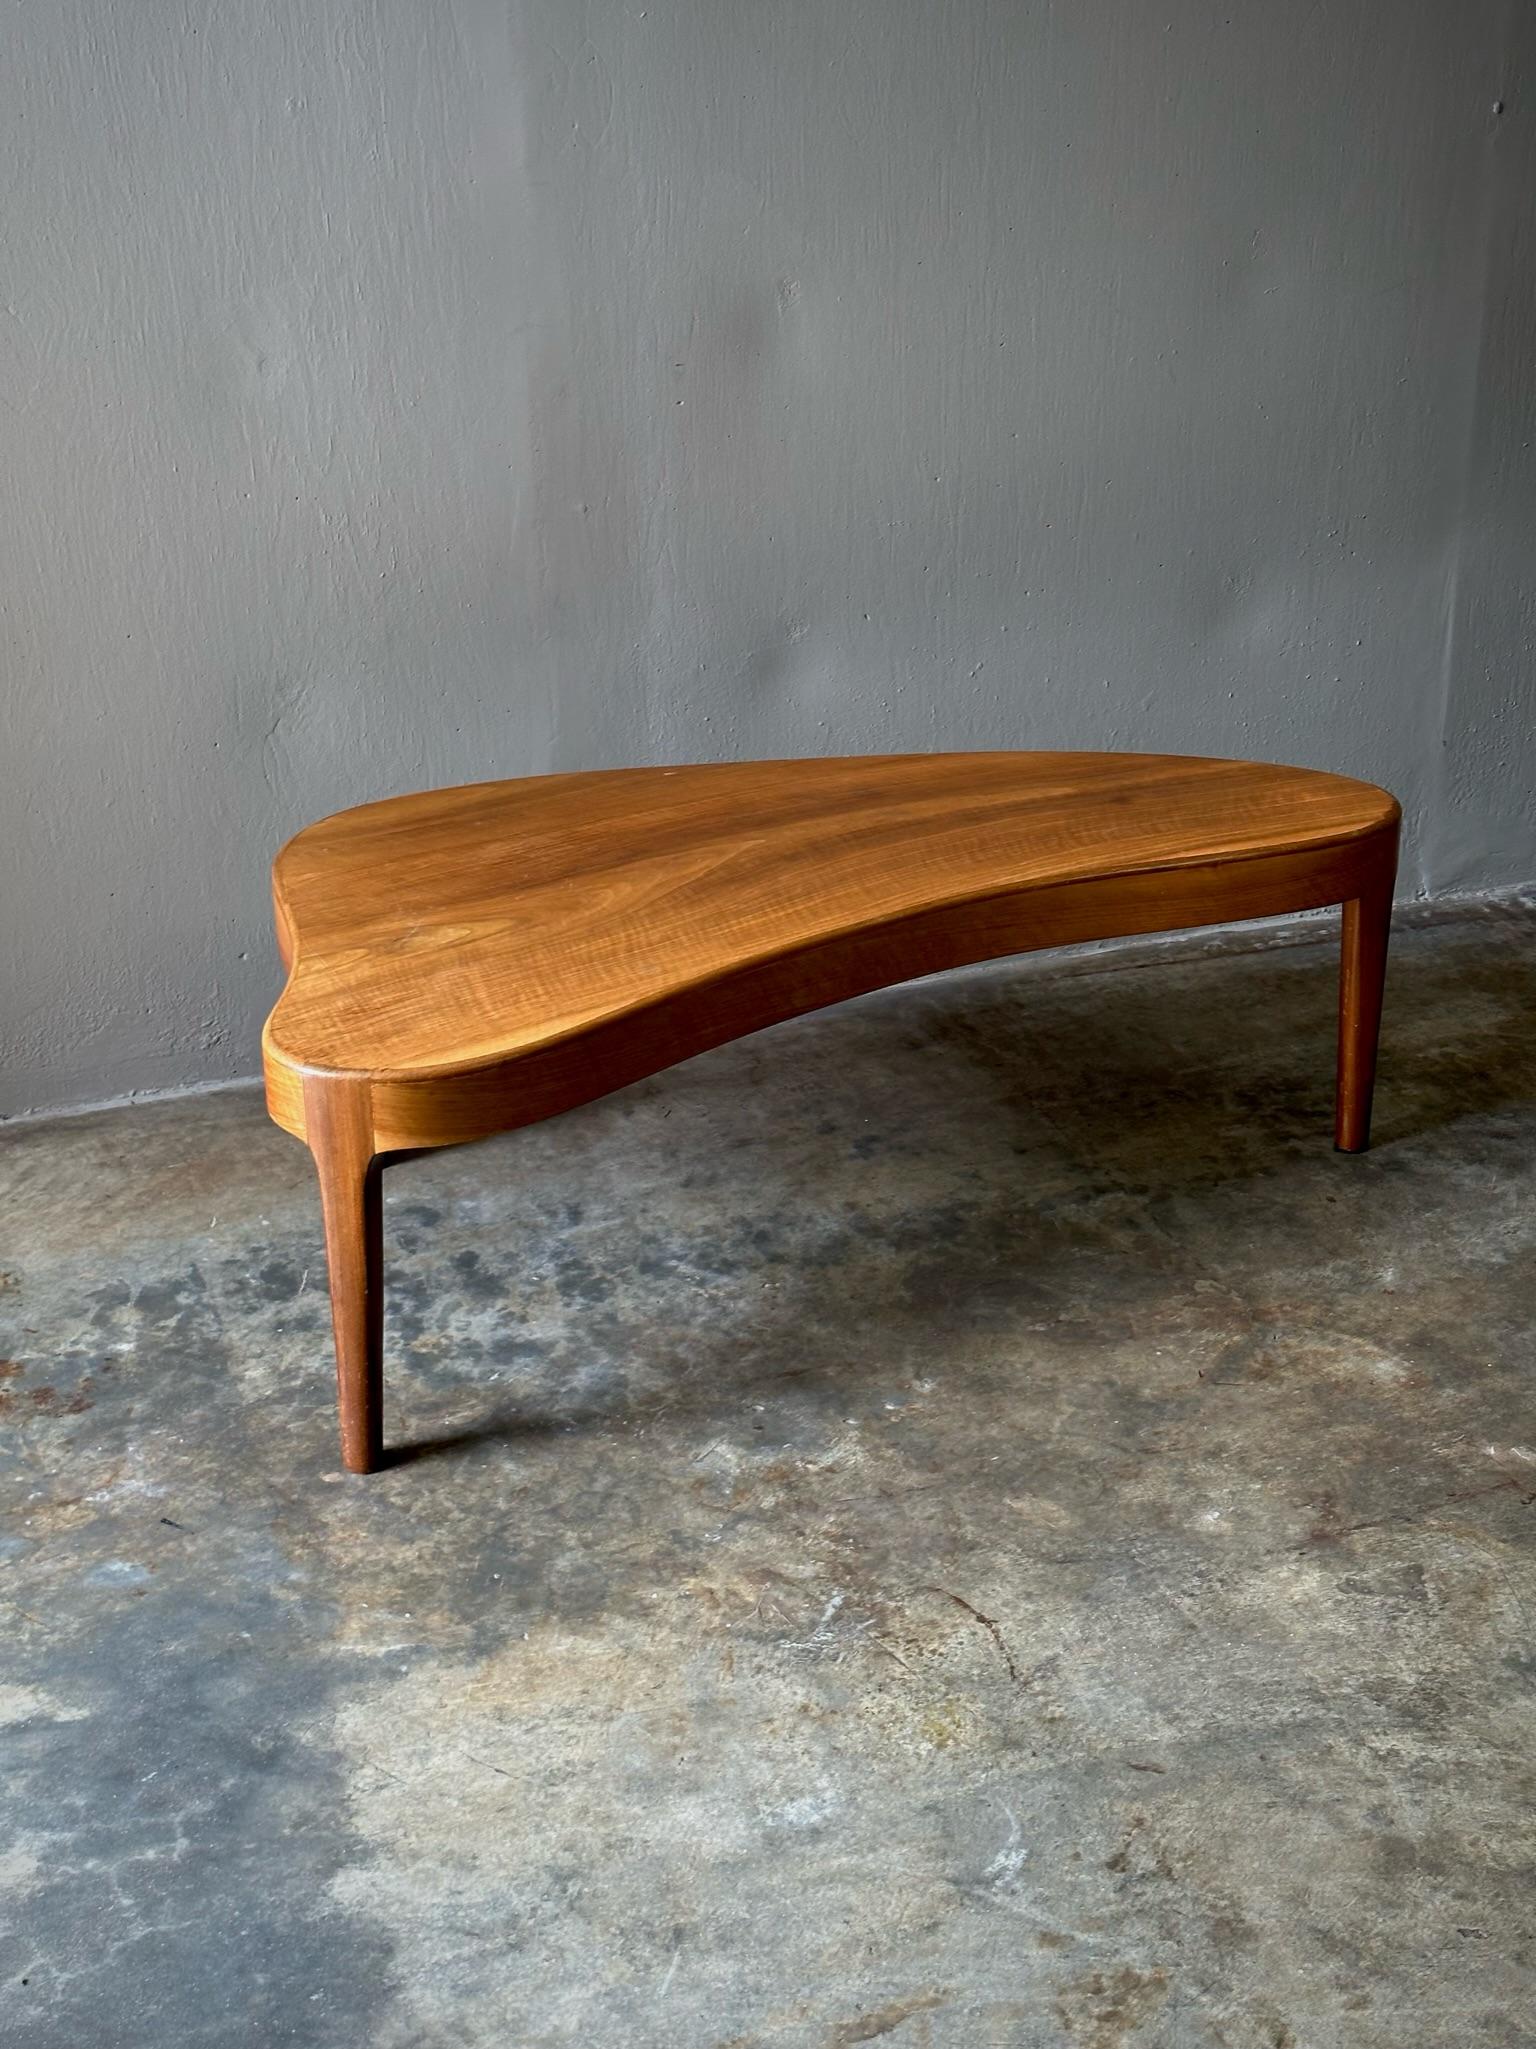 Hand-Crafted Danish Mid-Century Modern Elliptical Coffee Table For Sale